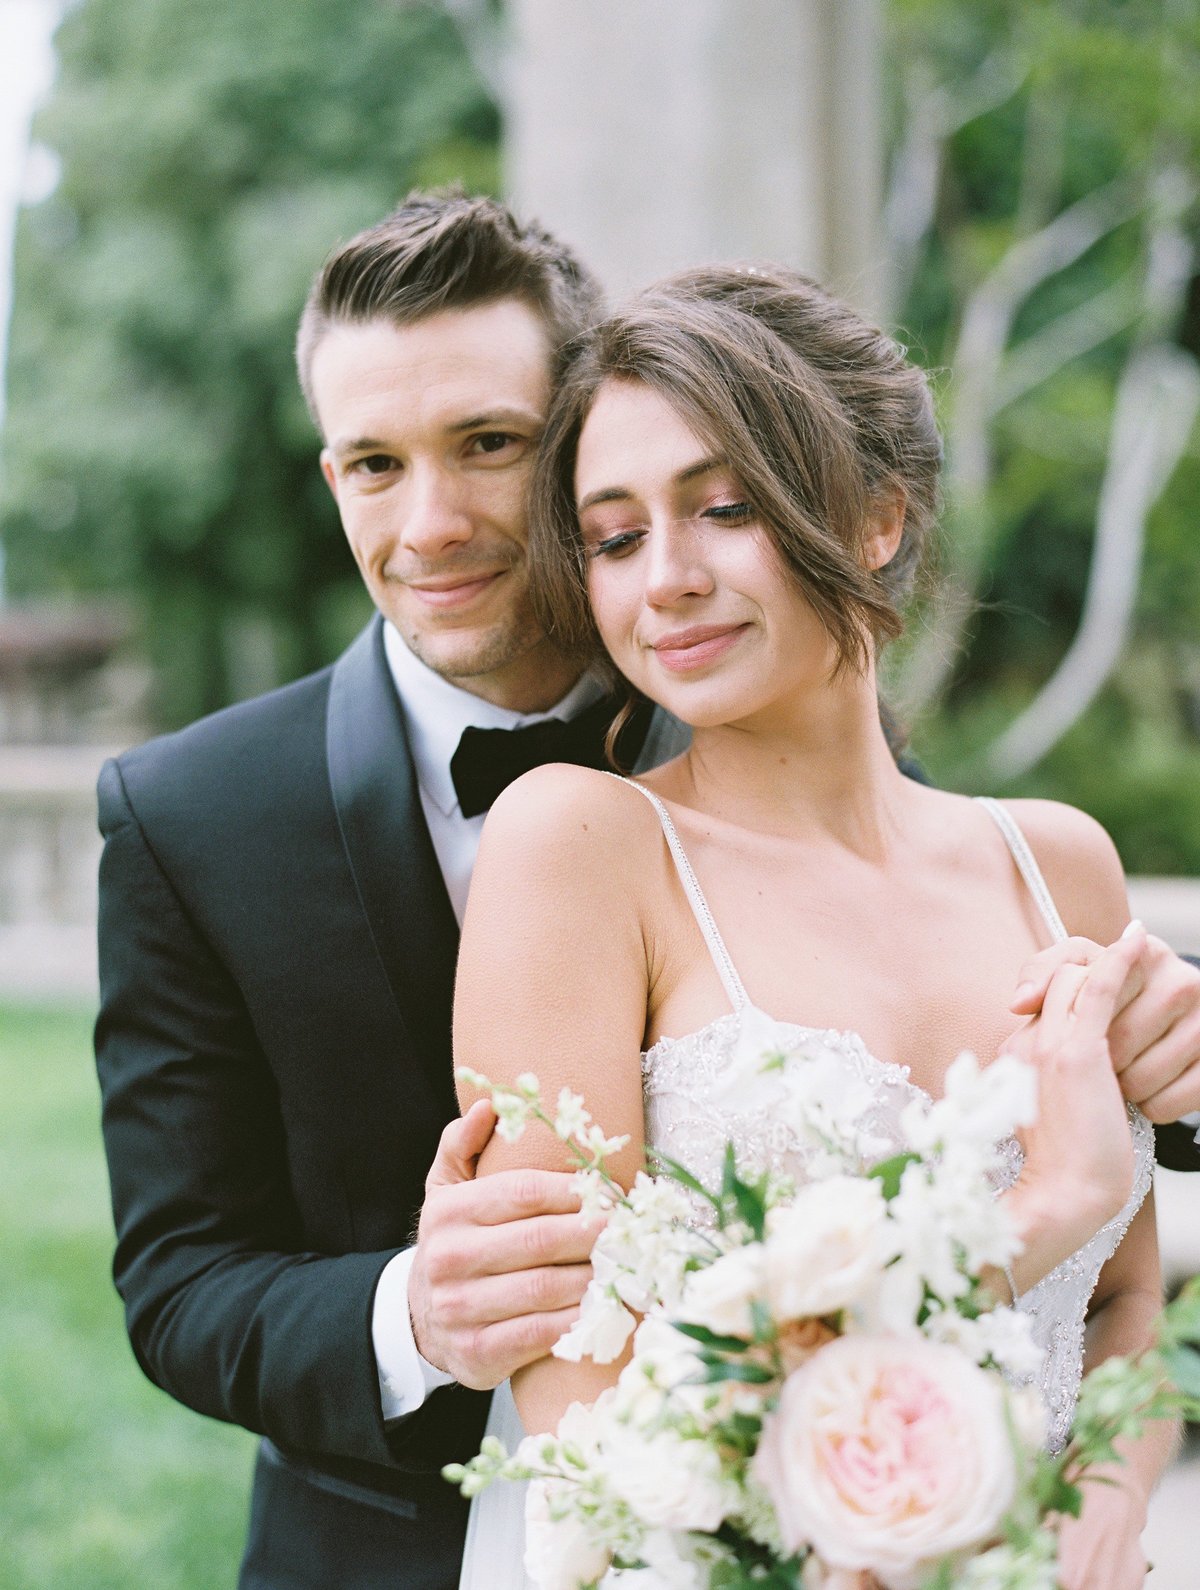 daniel-and-bethany-weddings-with-bridal-bouquet